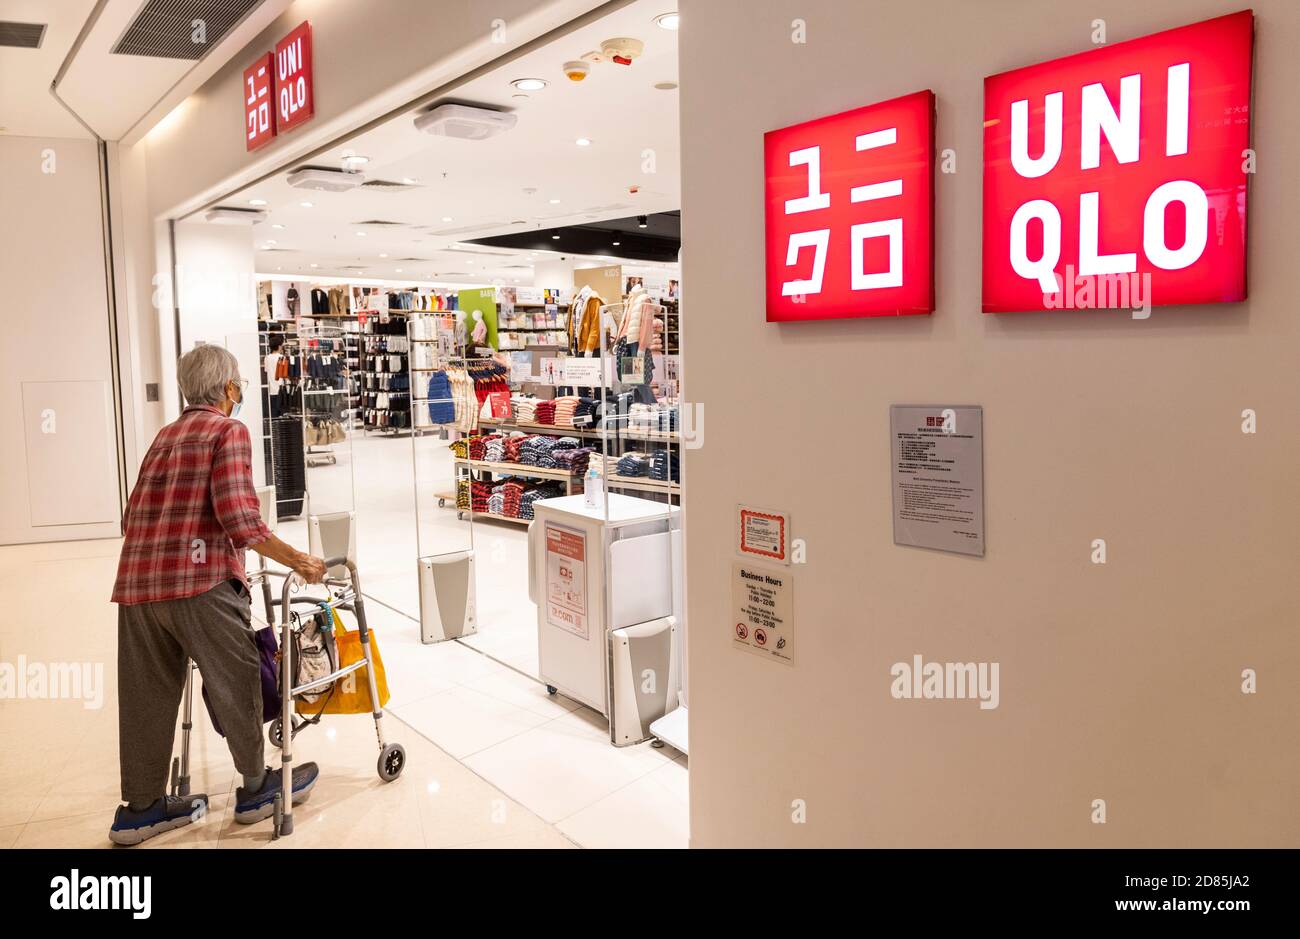 Japanese clothing brand Uniqlo logo and store in Hong Kong Stock Photo -  Alamy